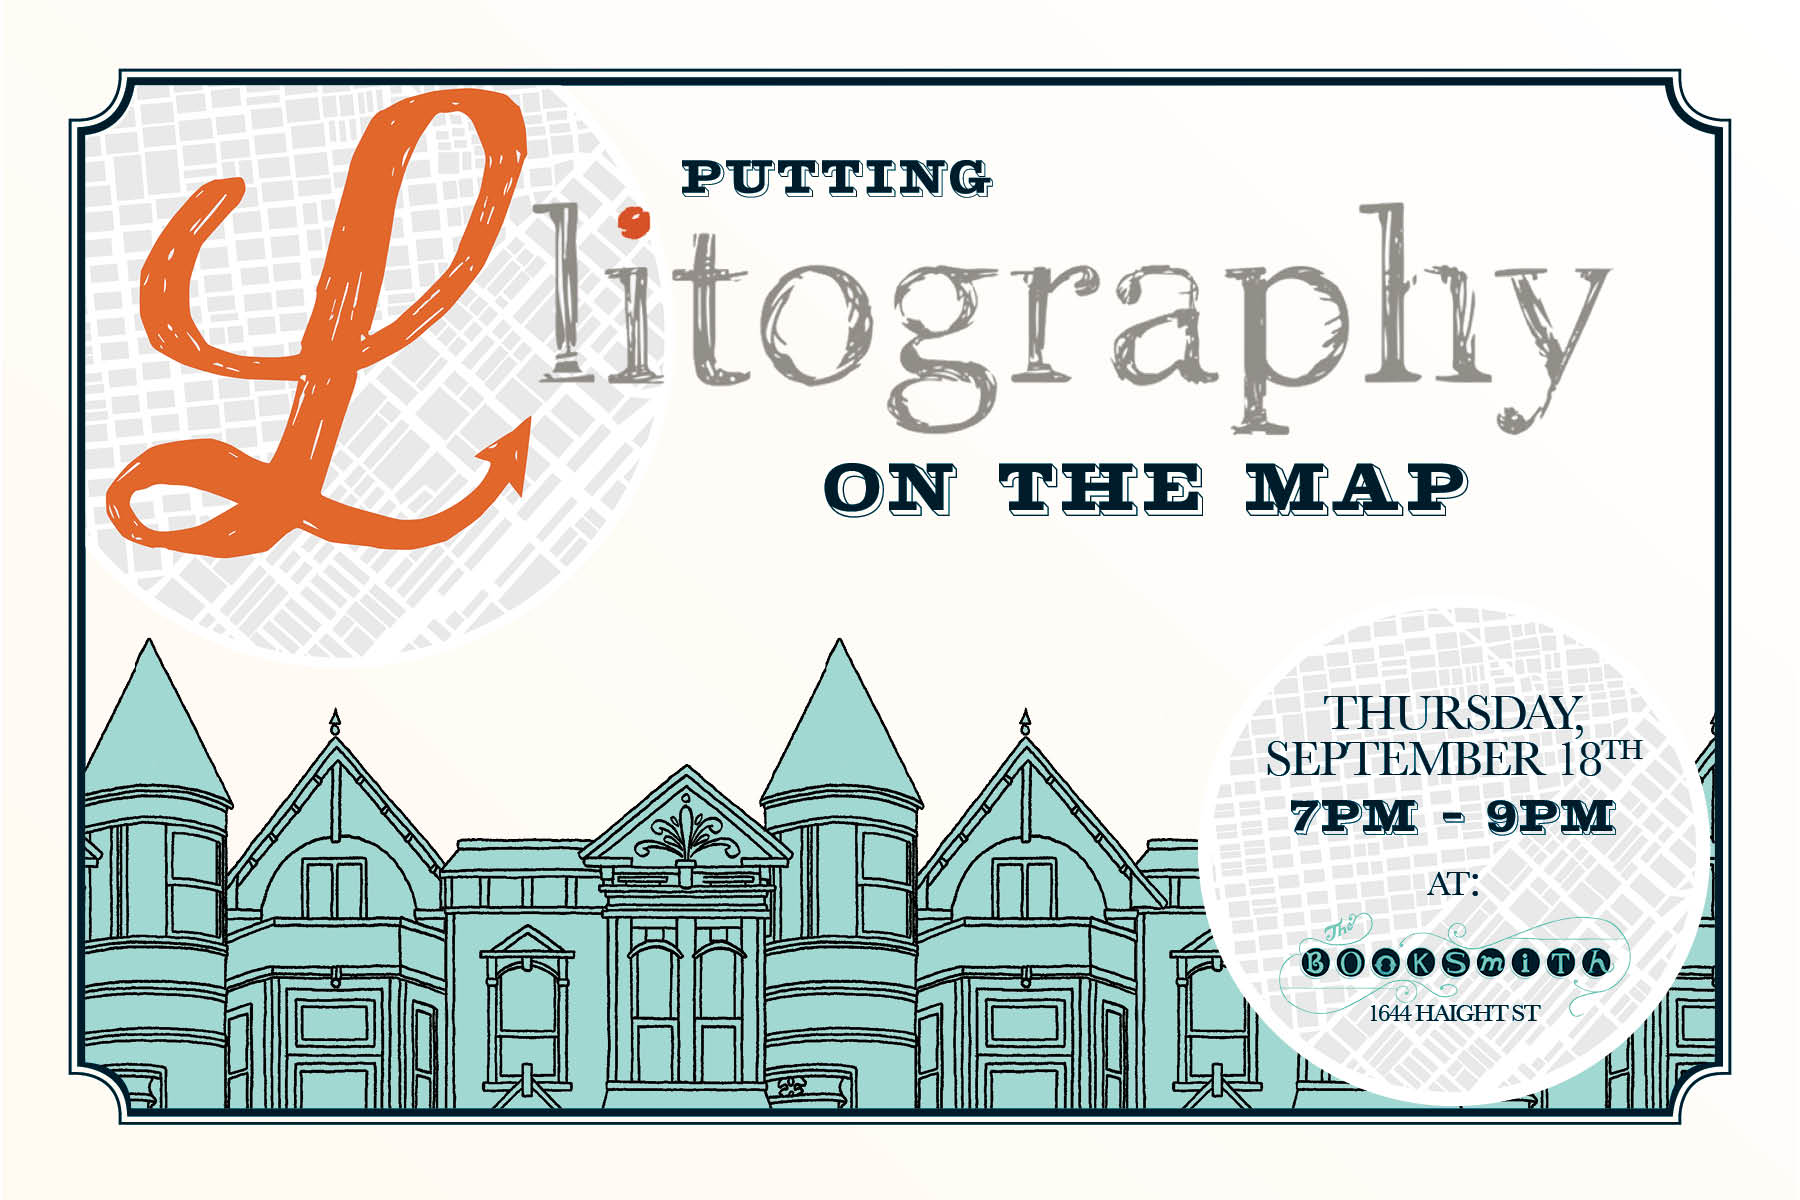 Litography's launch party "Putting Litography on the Map", September 2014